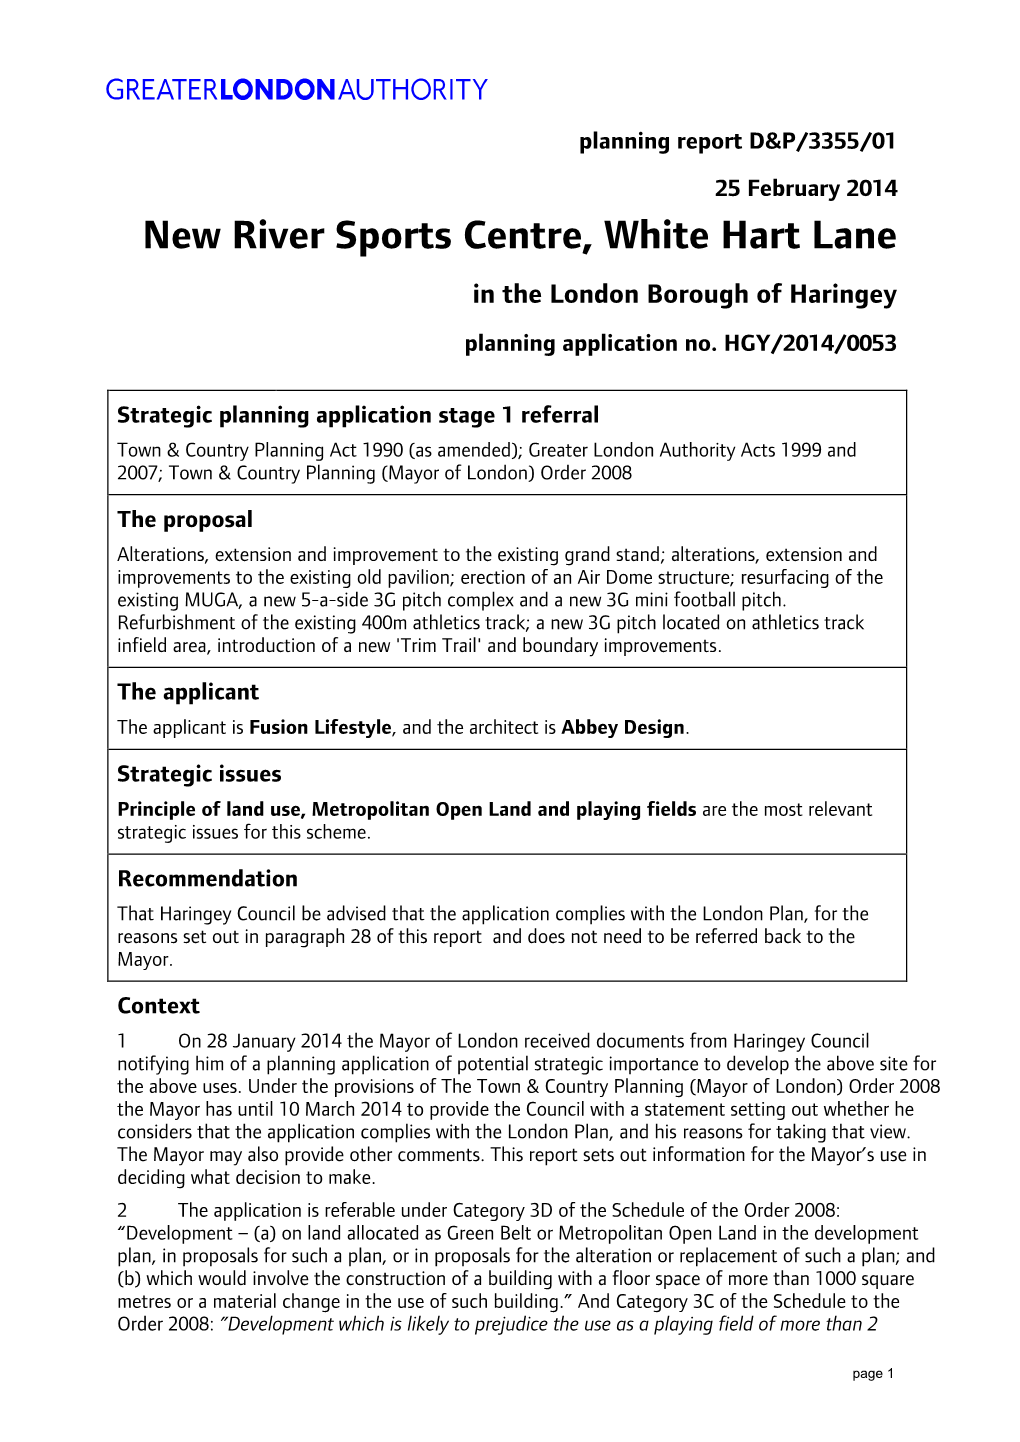 New River Sports Centre, White Hart Lane in the London Borough of Haringey Planning Application No